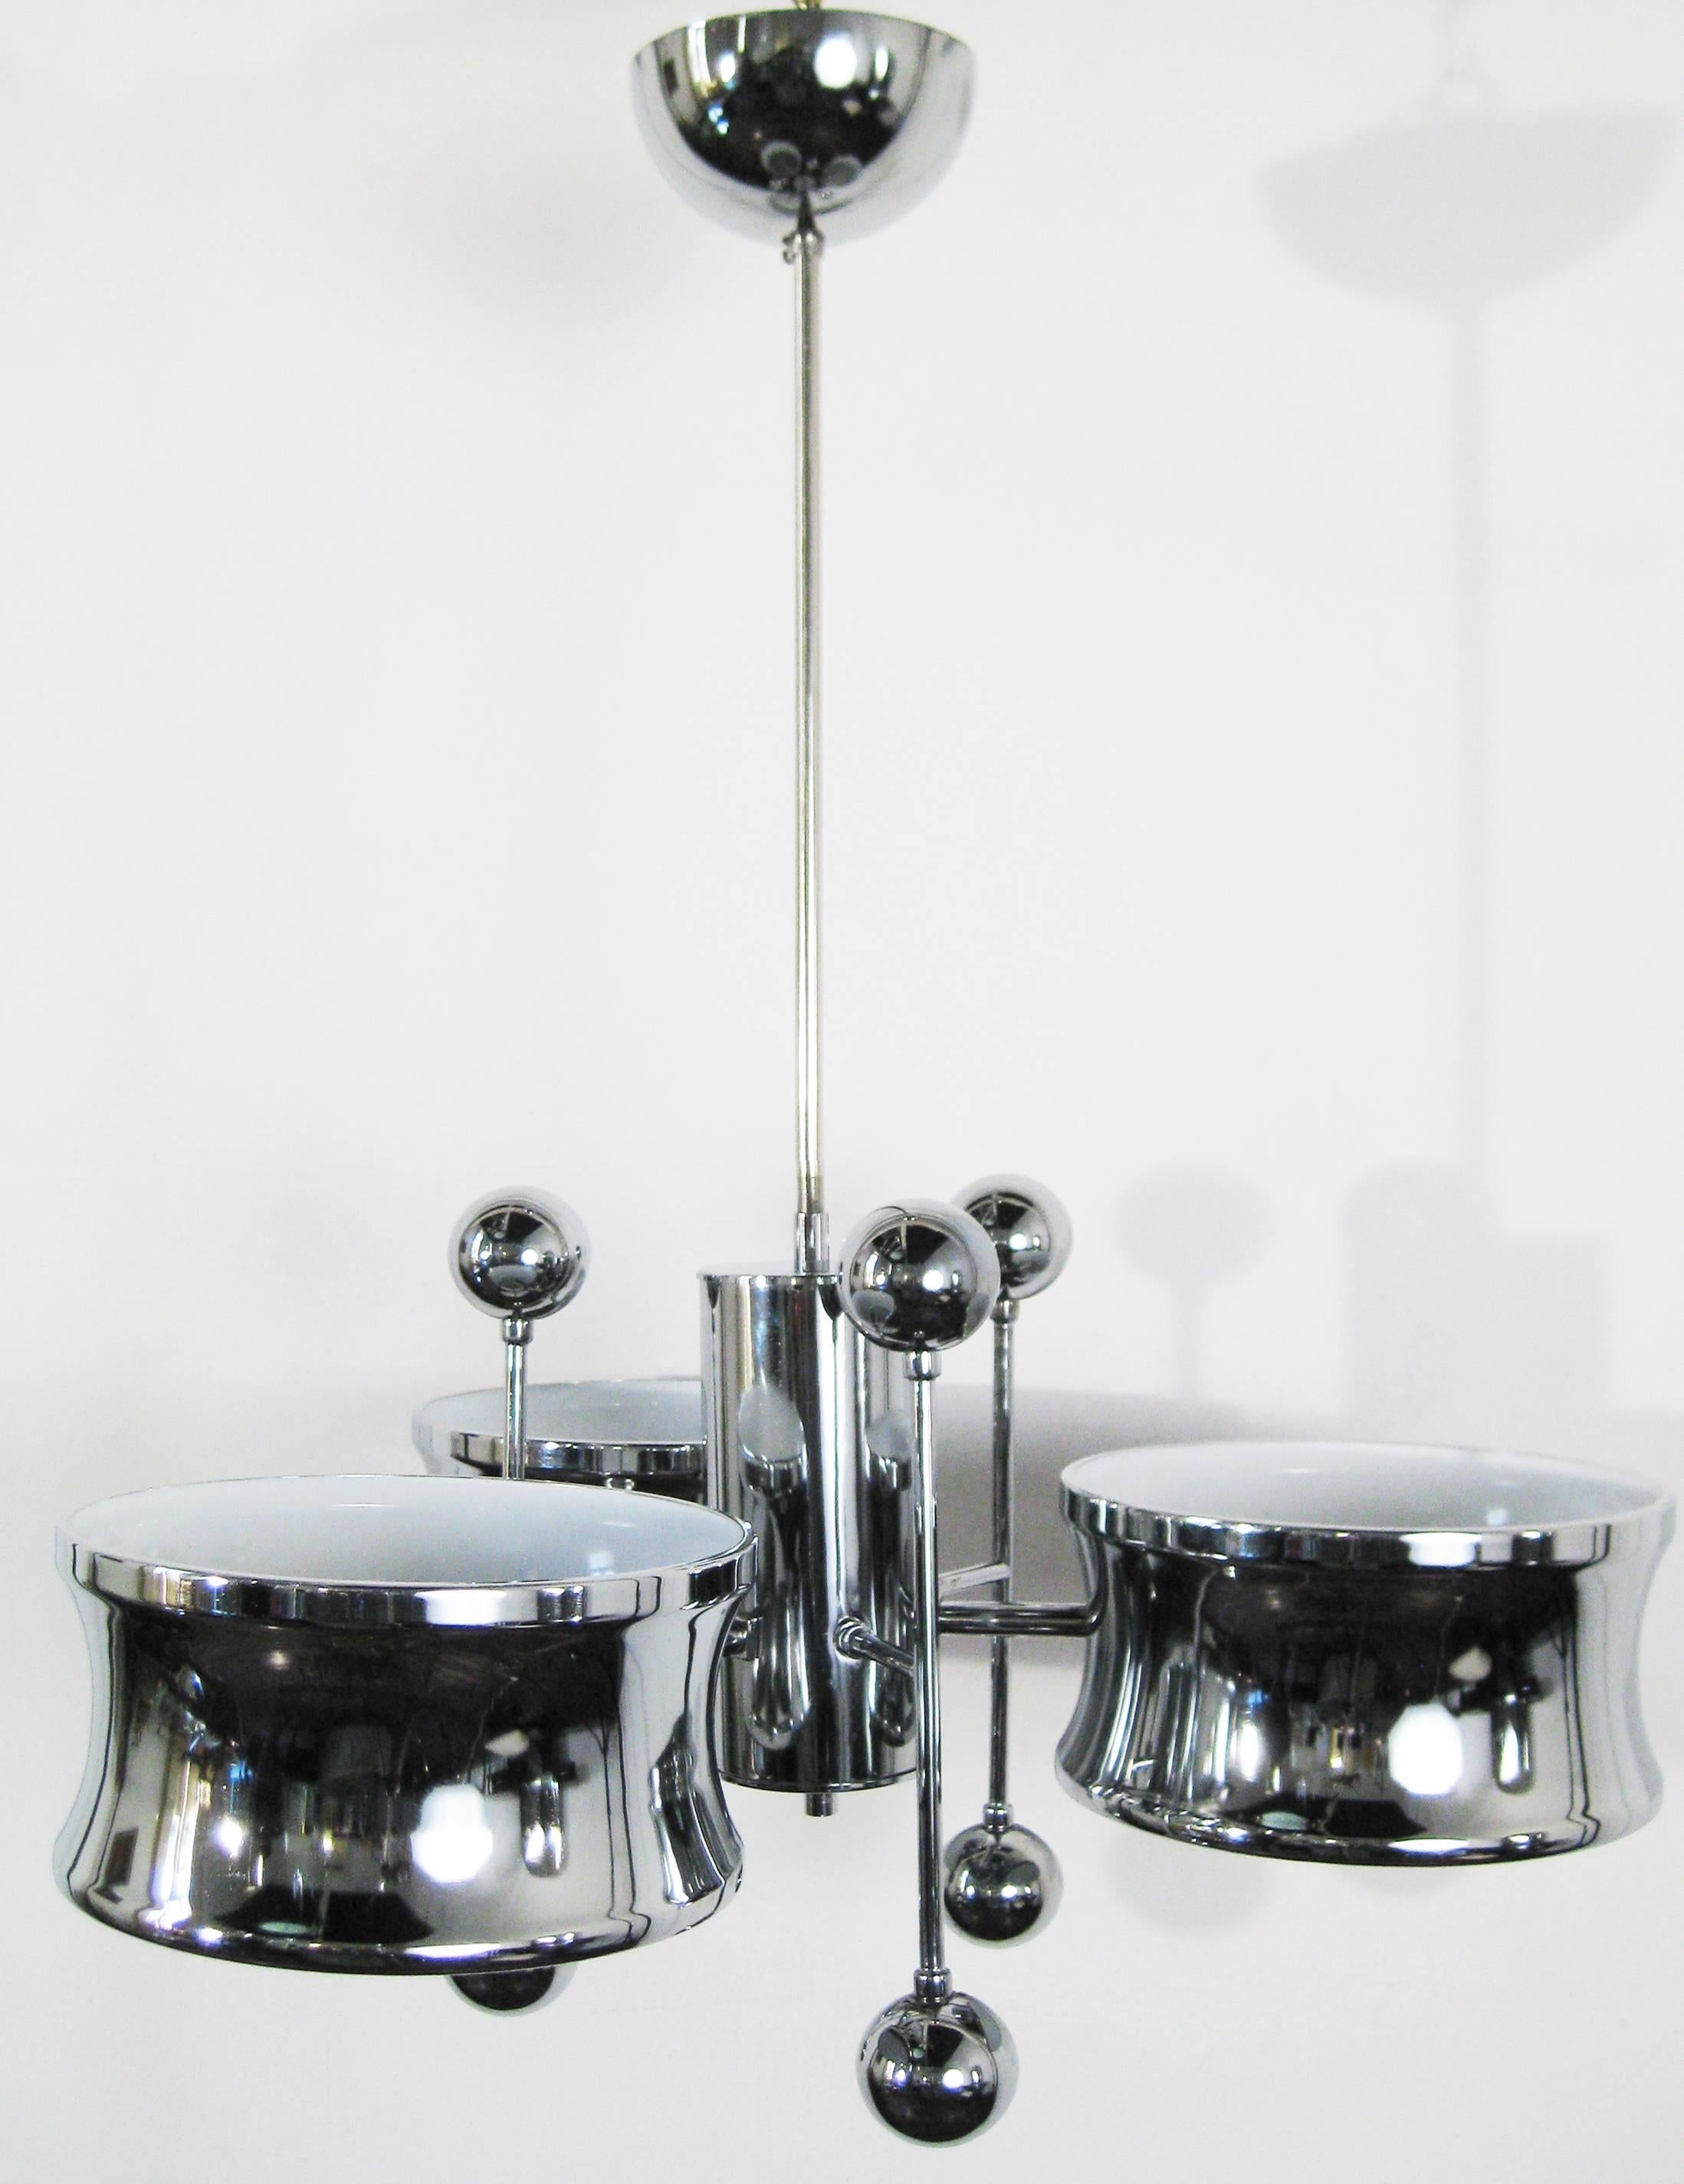 This unusual lamp is from the time period when the designs of Gaetano Sciolari were produced by the upscale American company Lightolier. The chromed arms are crowned by wonderful chromed spheres. Whimsical and yet so very tasteful. A lovely,